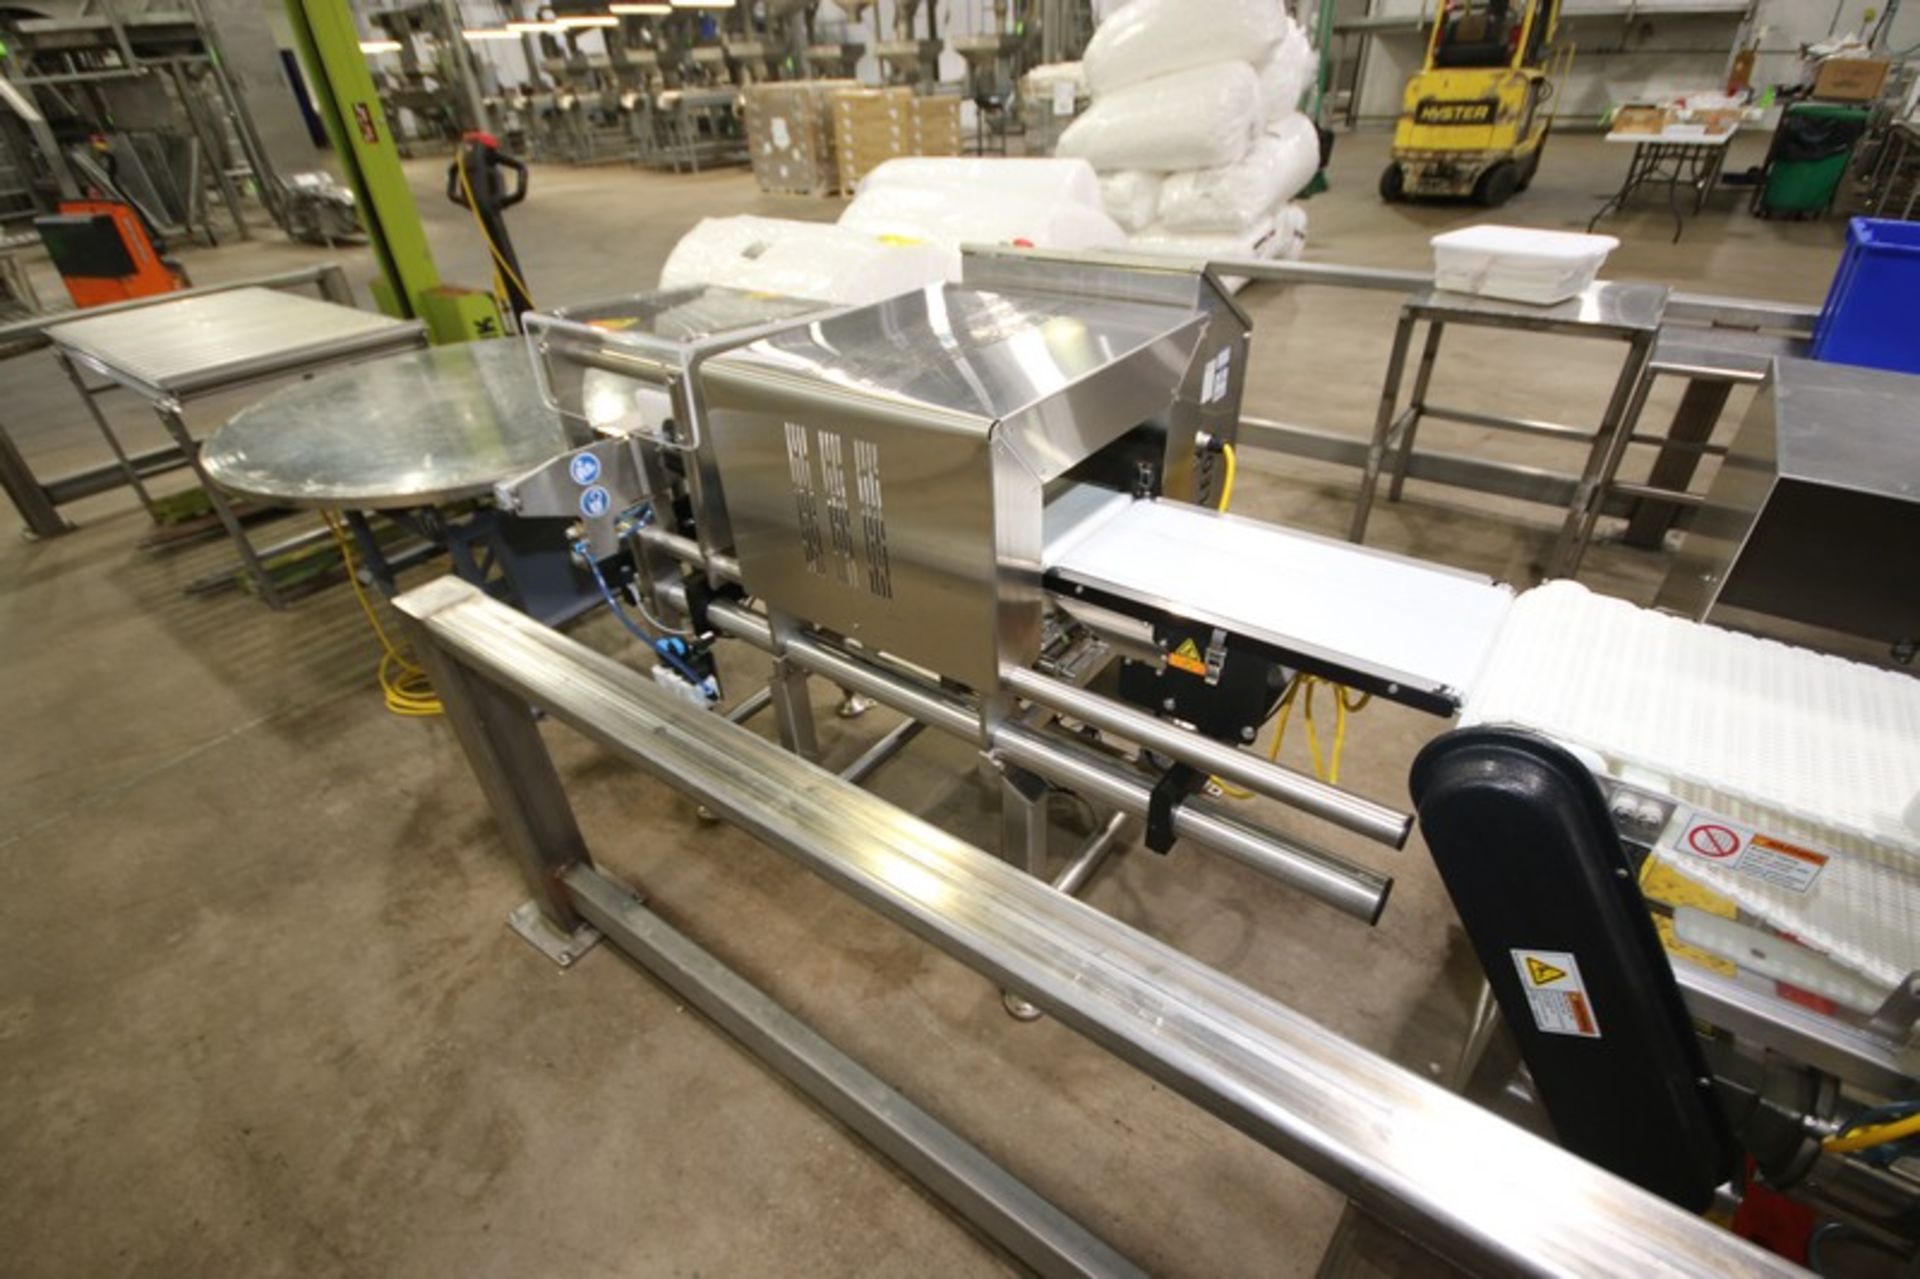 2020 Mettler Toledo Check Weigher, M/N C3130, S/N C04410302020, 115/230 Volts, 1 Phase, with Display - Image 5 of 6